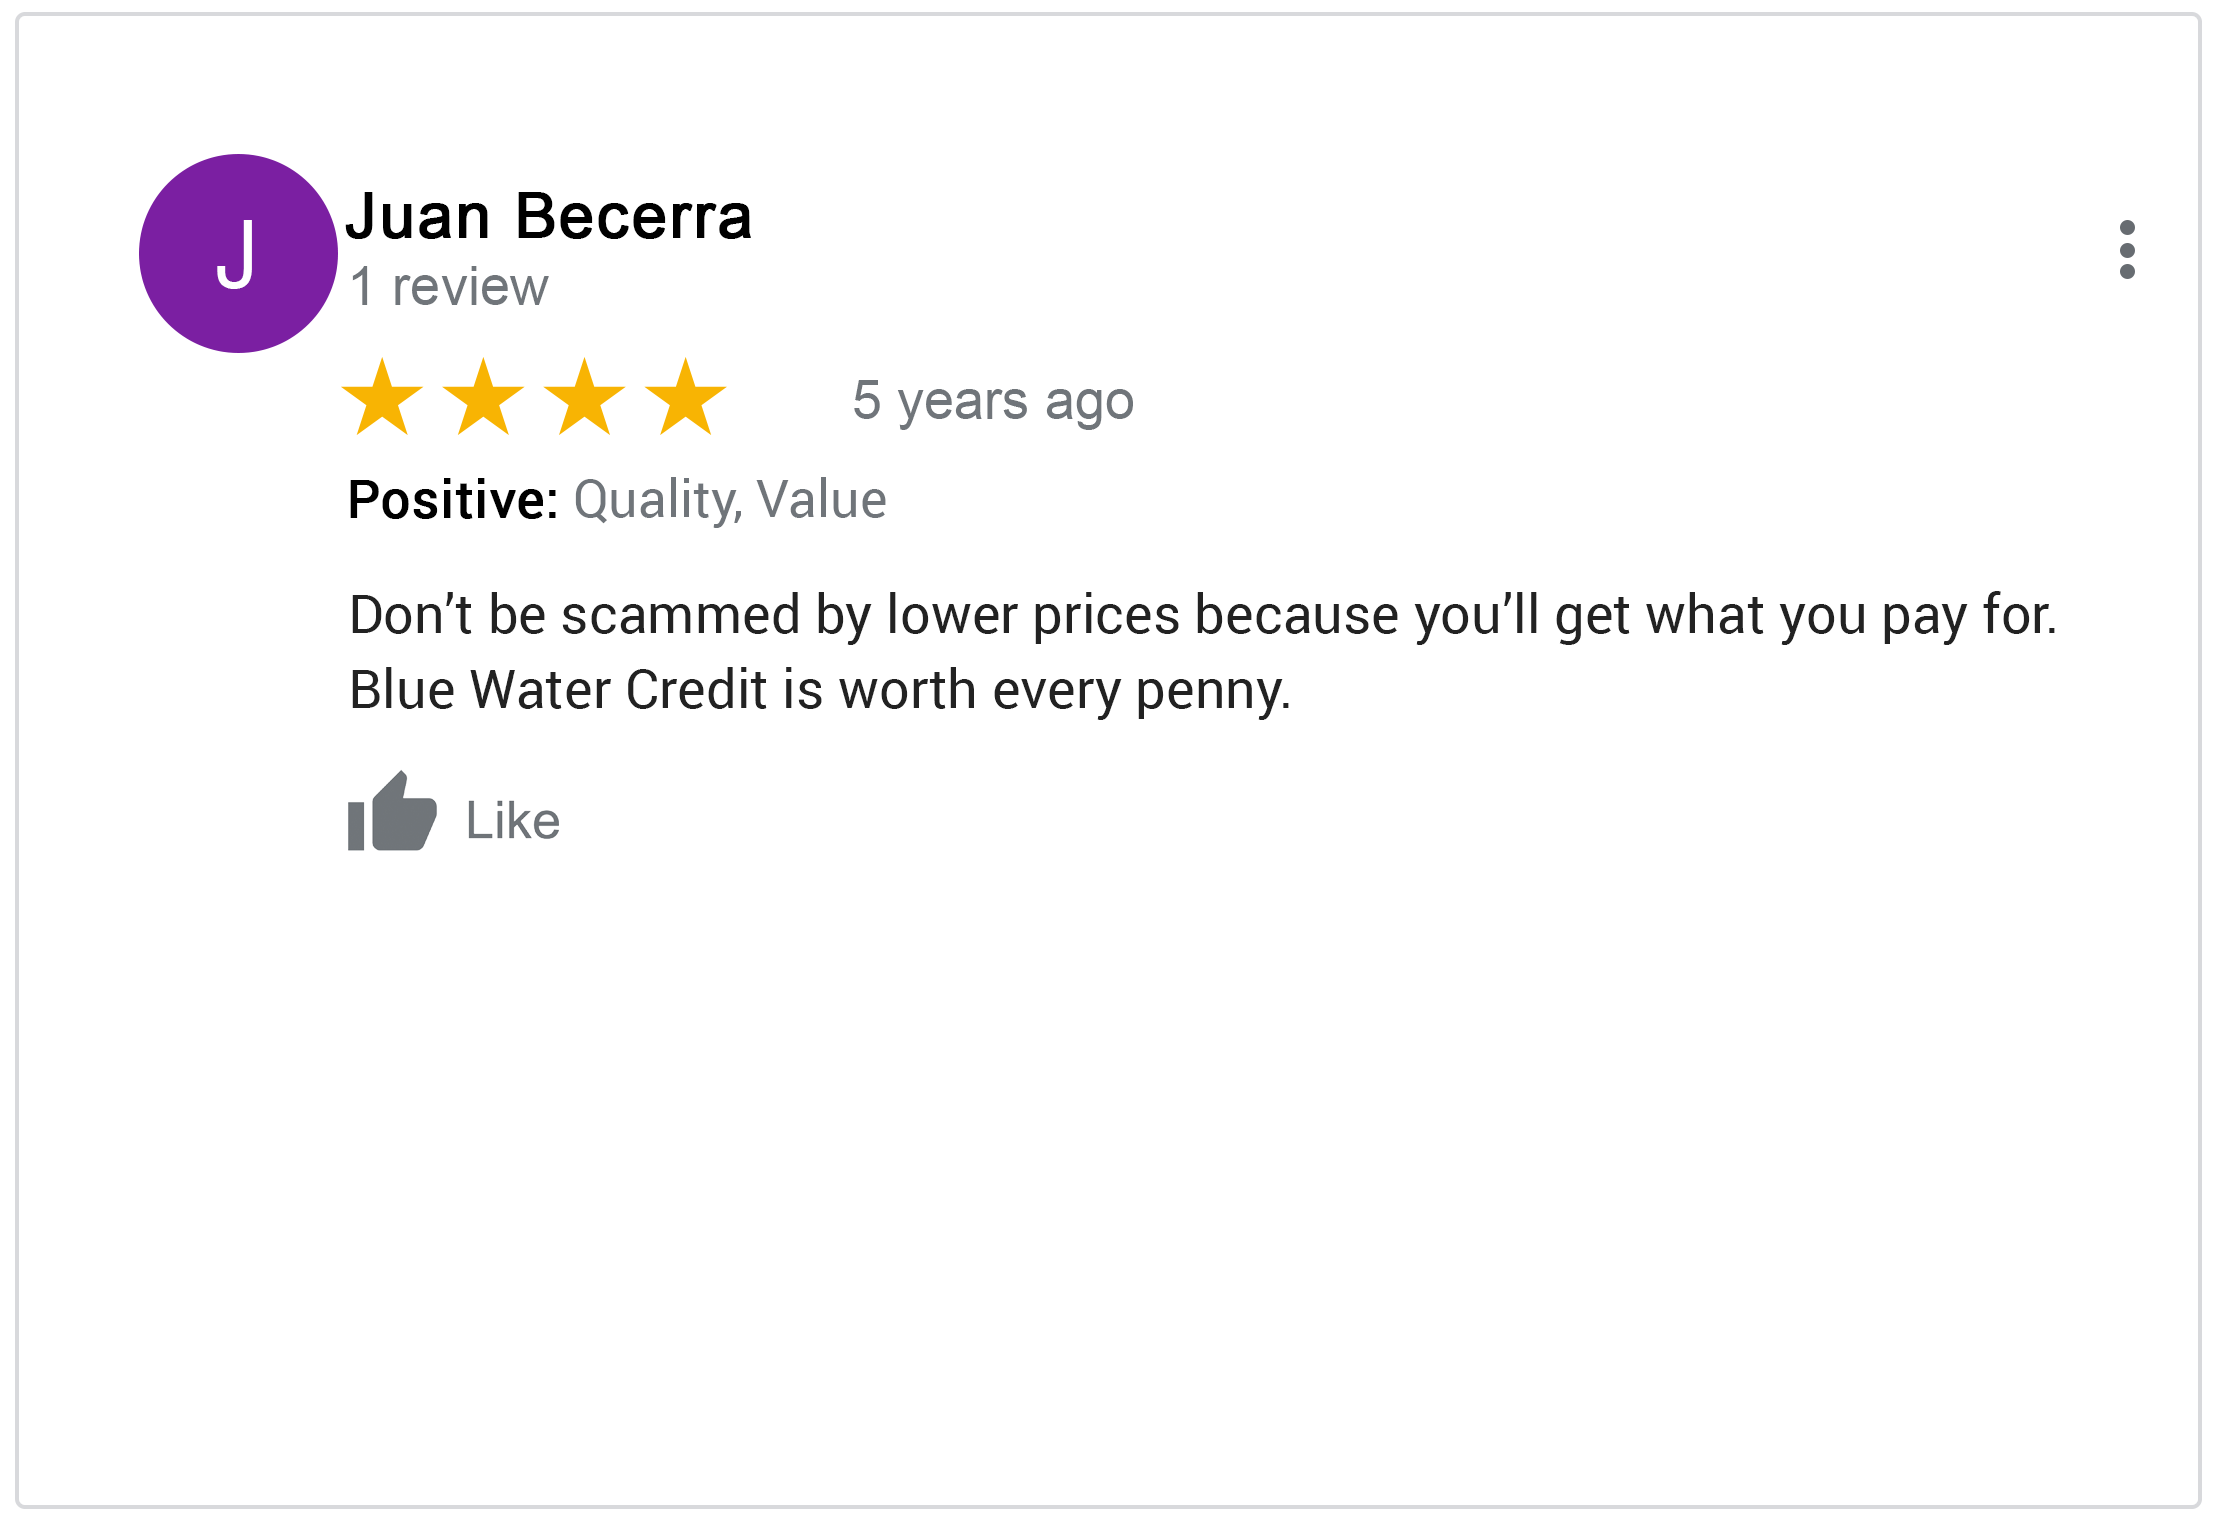 Check out more reviews on Google!